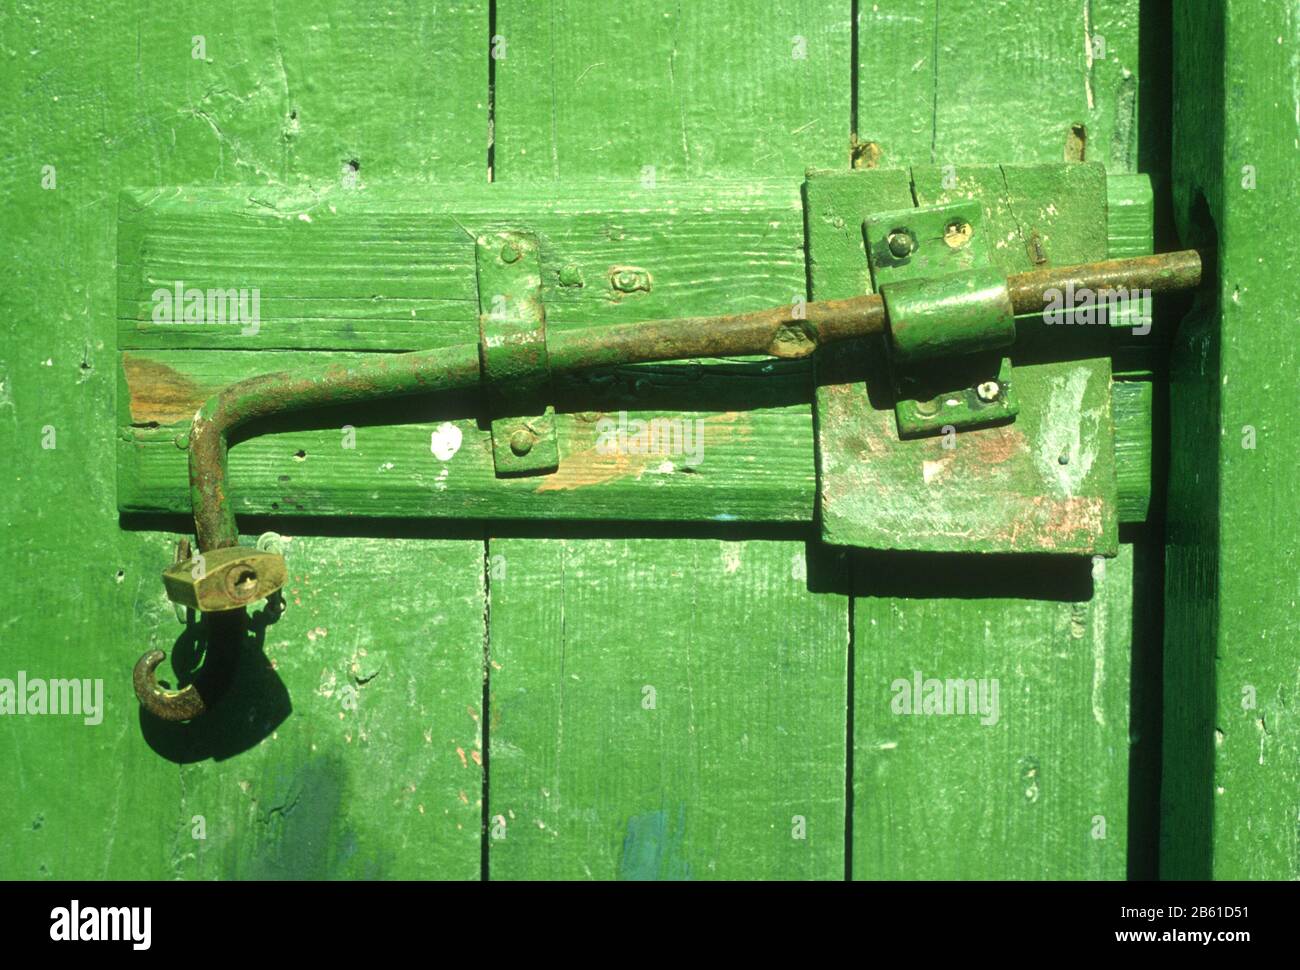 Hand made fittings on an old wooden, painted, green door in Metsovo, Ioannina, Epirus, Greece Stock Photo